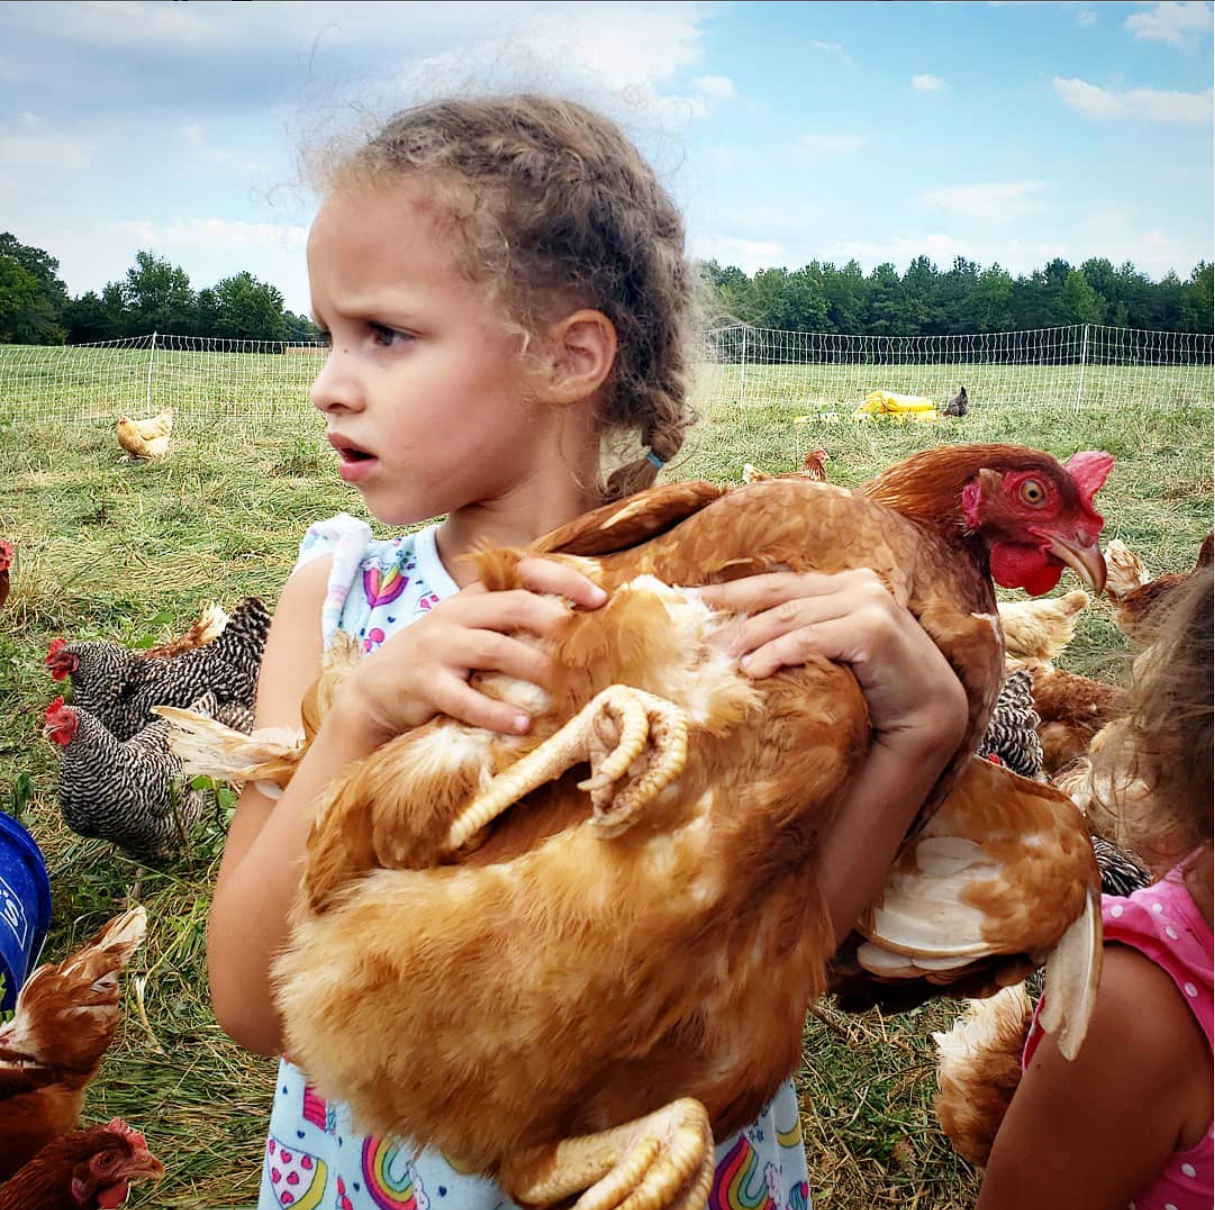 Emmy, a little girl with braids and a patterned shirt, holds a brown chicken that she has caught close to her chest.